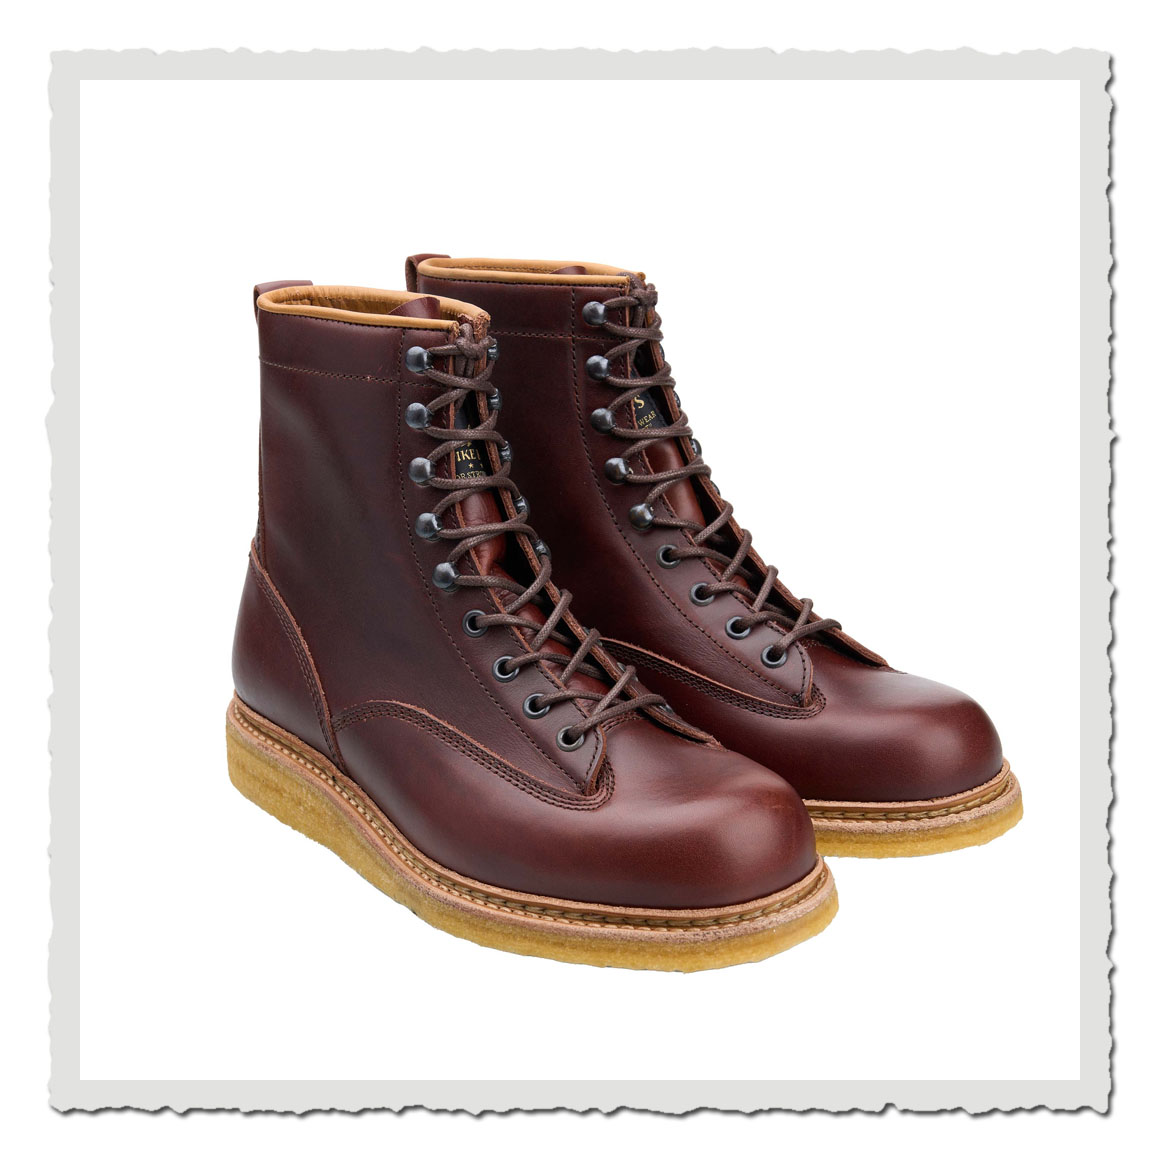 1947 Trapper Boots brown